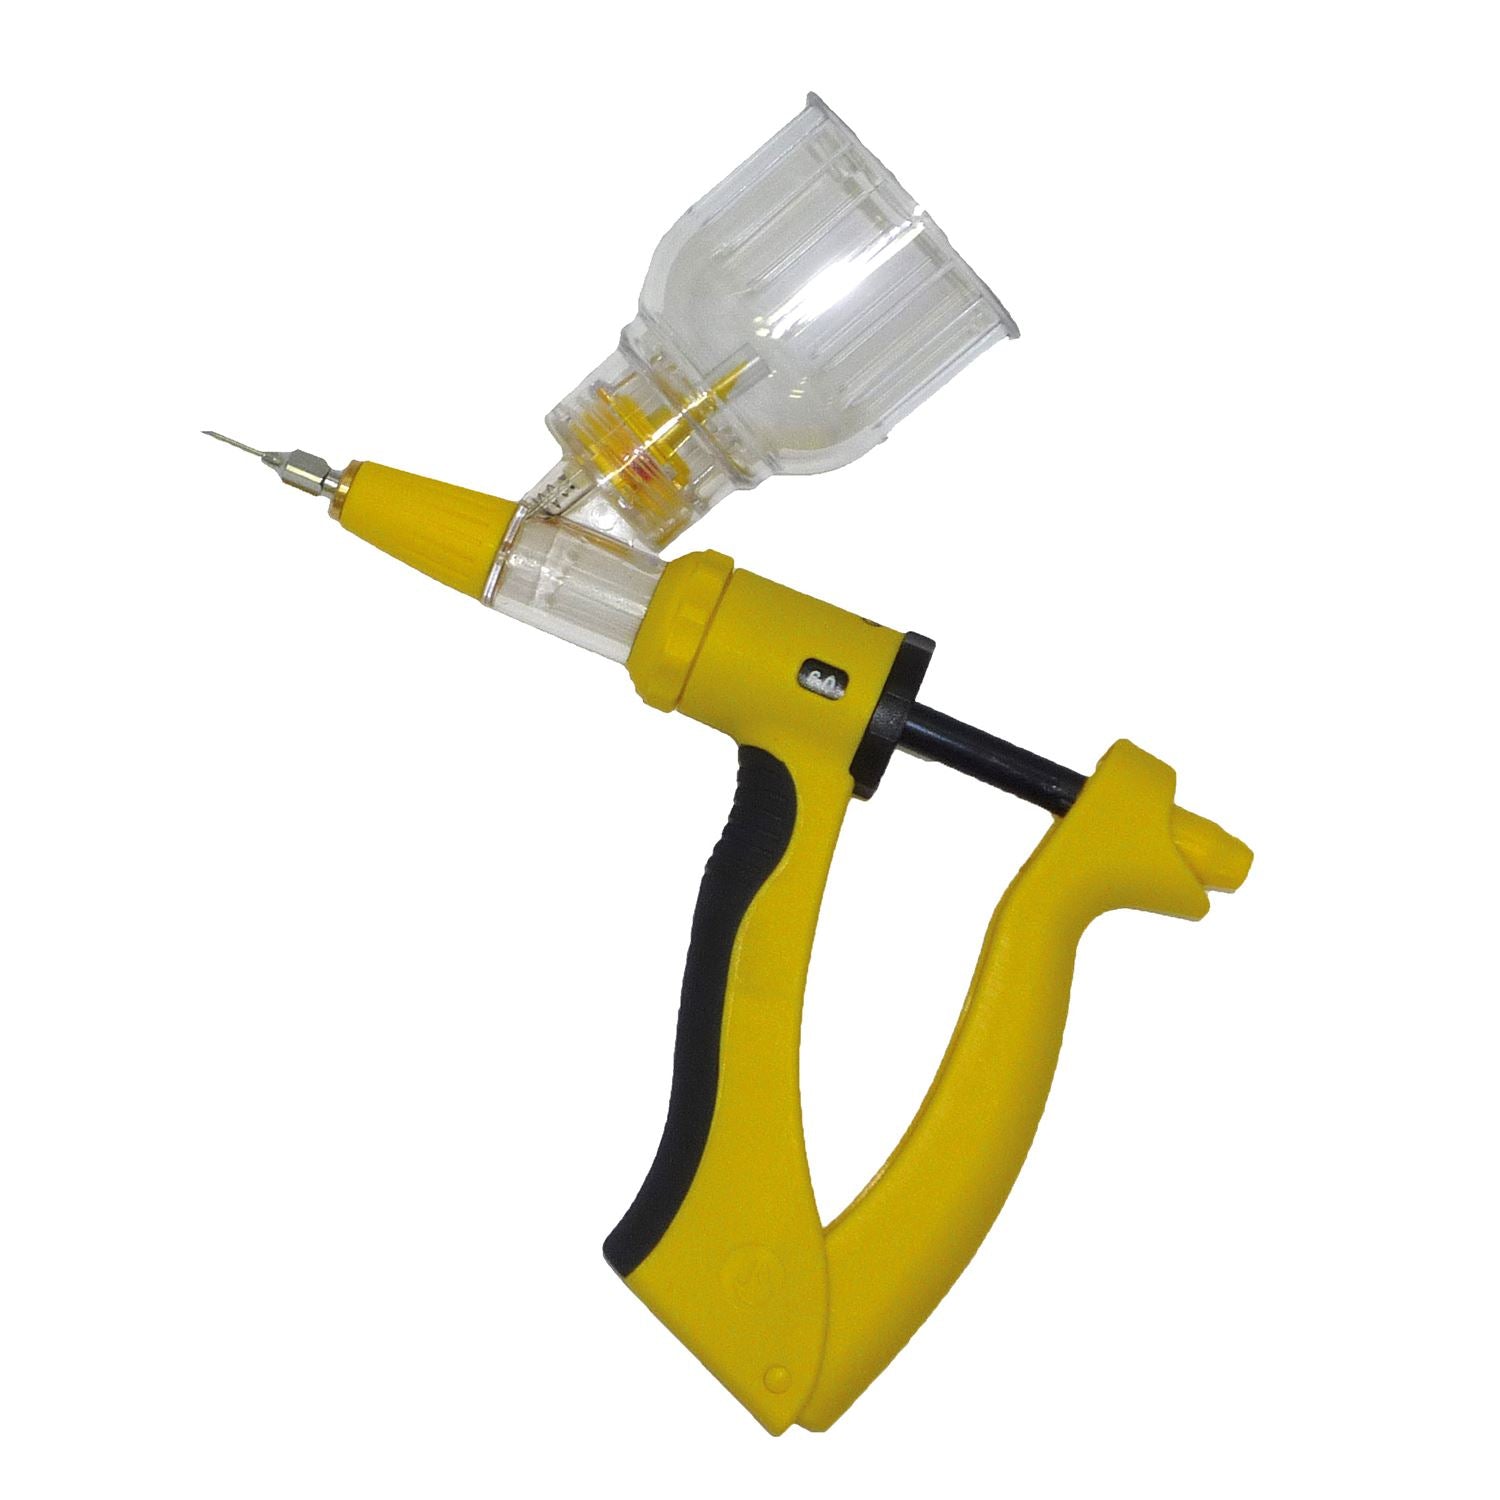 Quicktag Qmv Bottle Mounted Vaccinator - Just Horse Riders